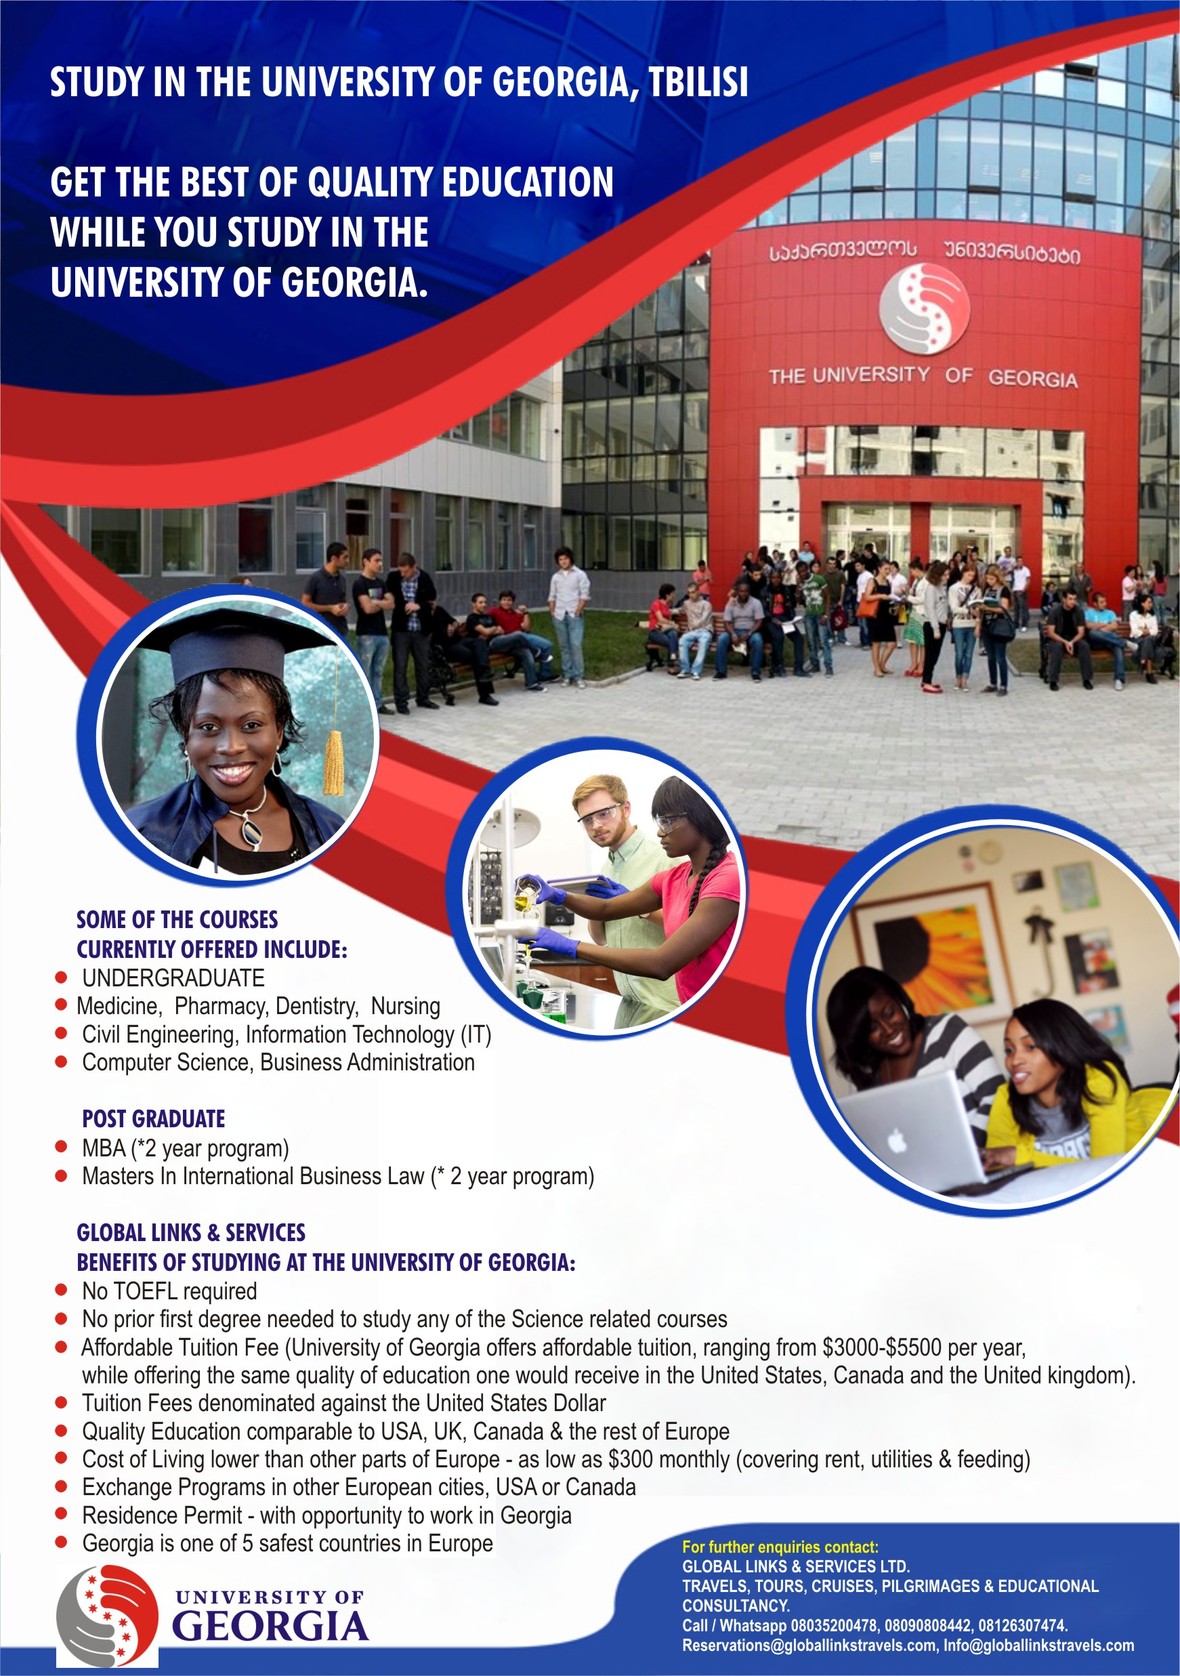 ADMISSION FOR UNDERGRADUATE STUDENTS AGES 17 AND ABOVE NOW ON AT THE UNIVERSITY OF GEORGIA-TBILISI!!!